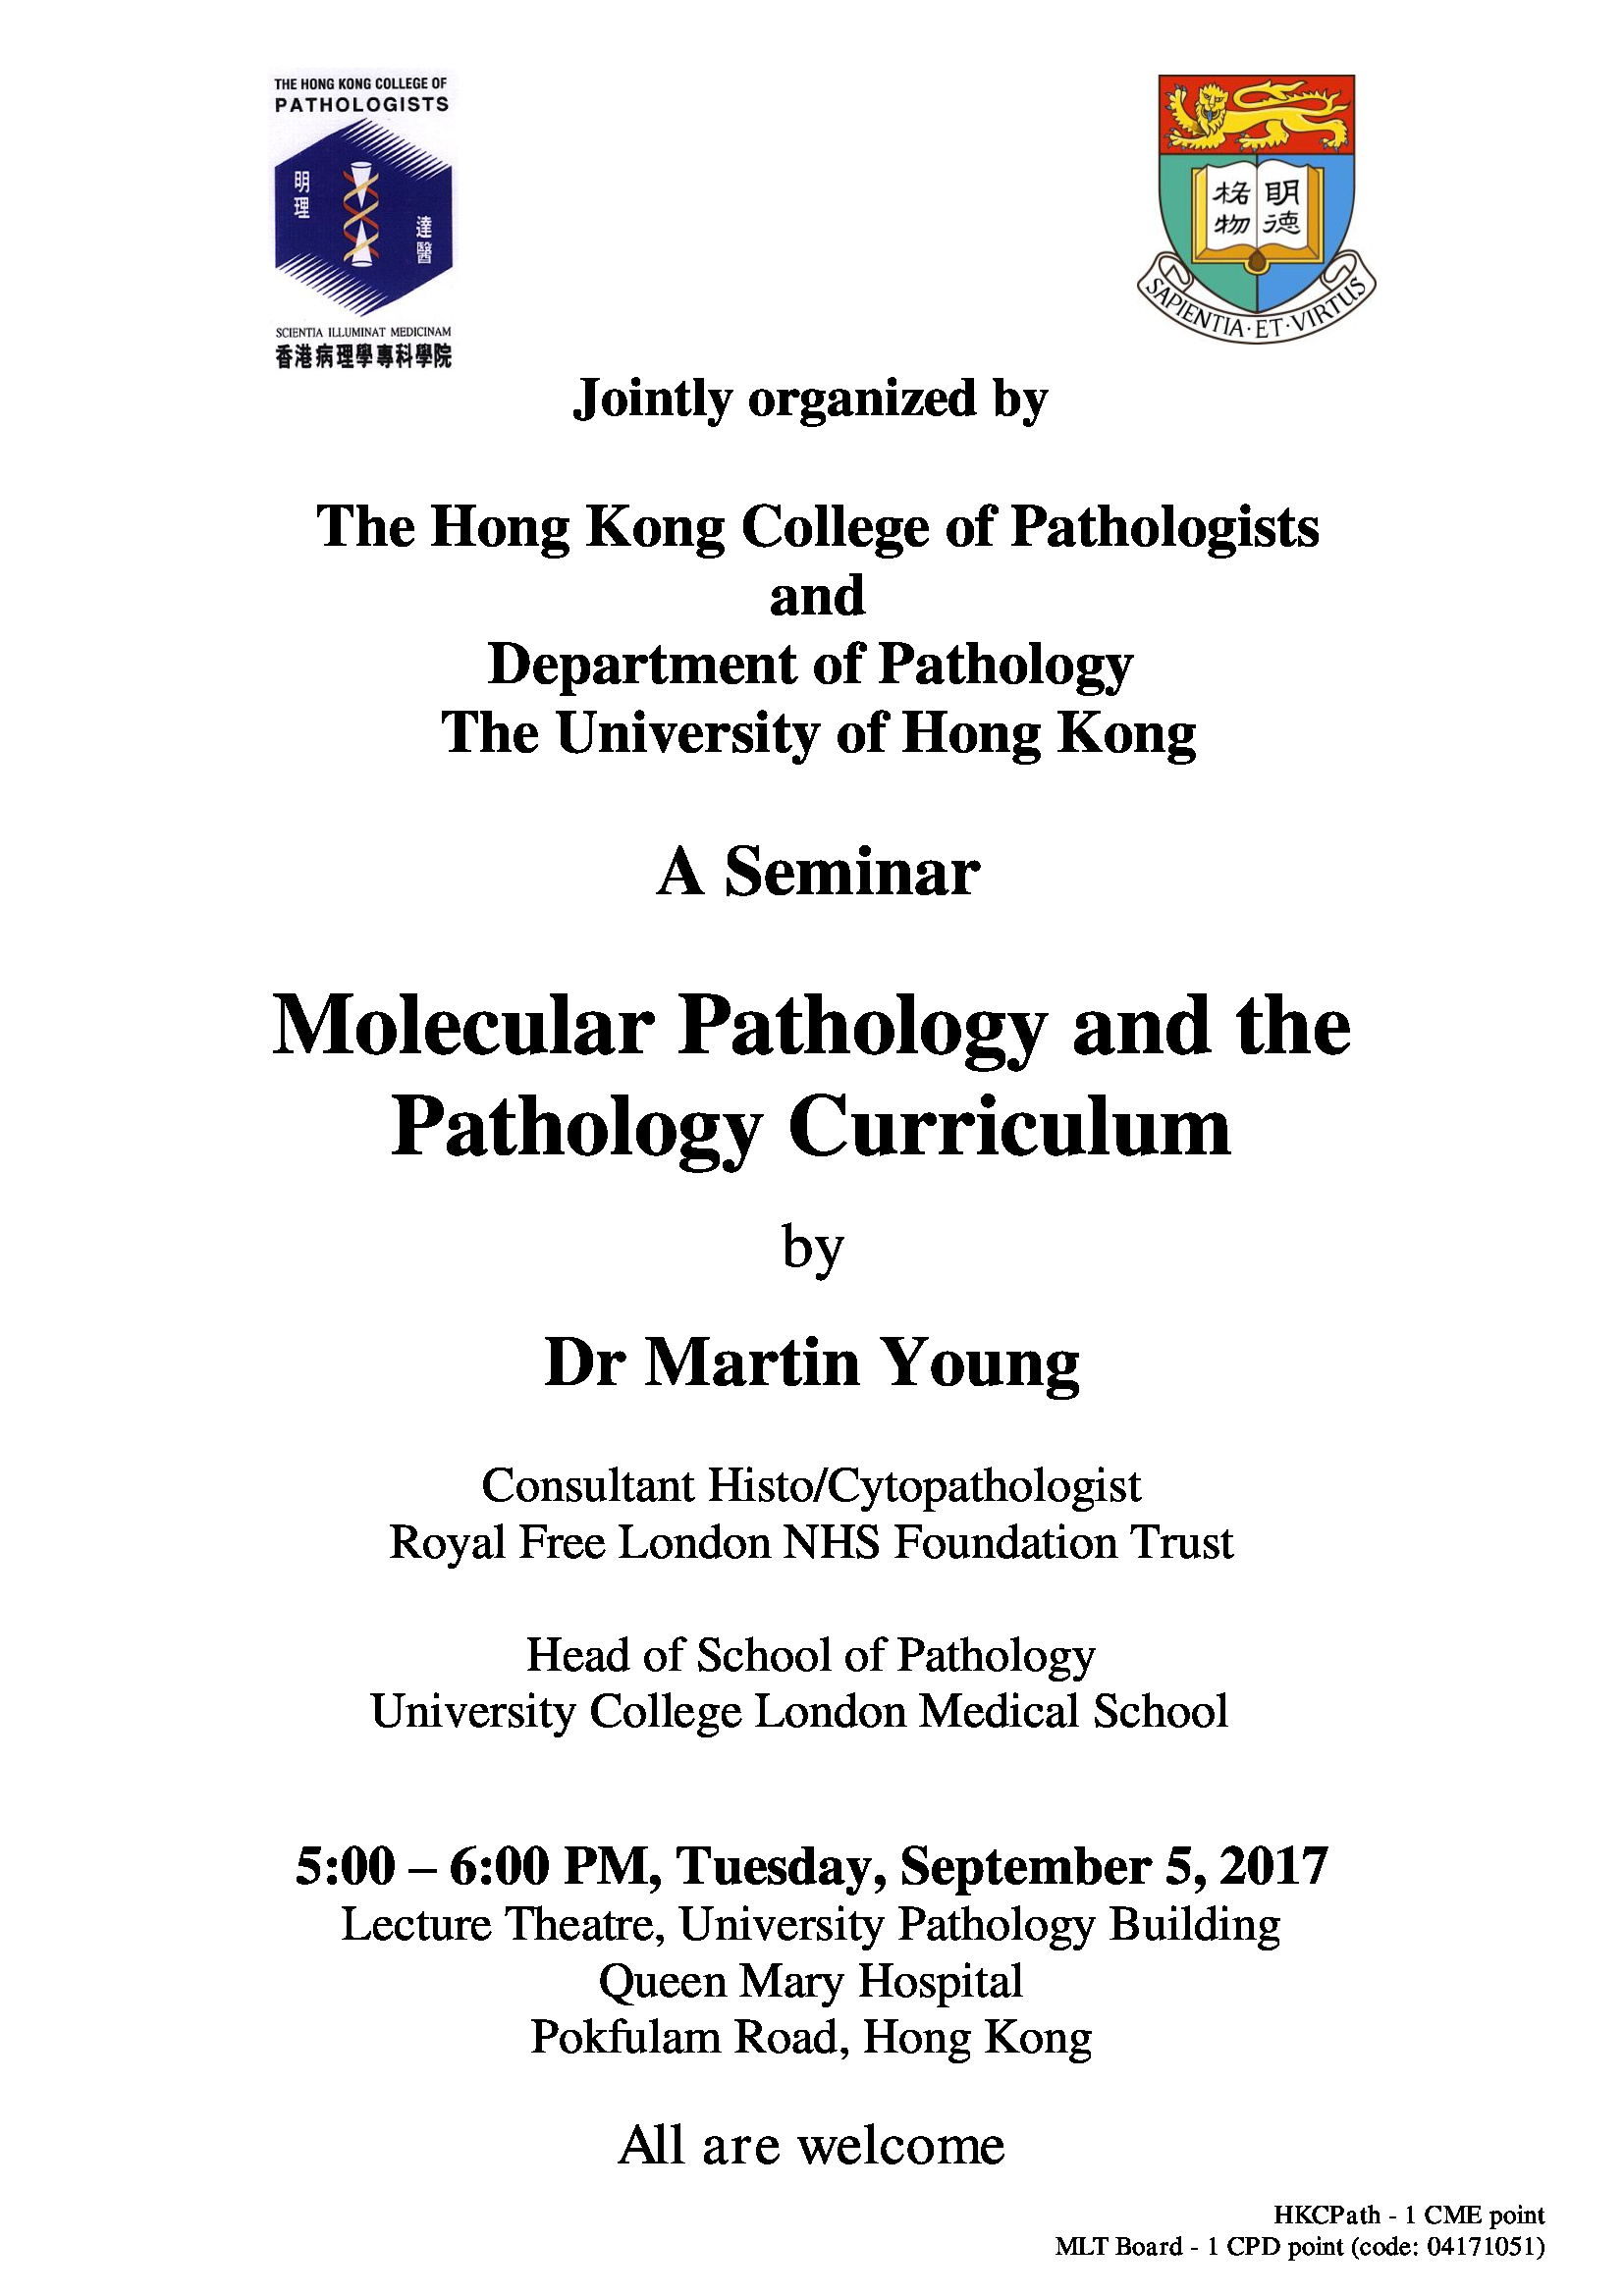 A Seminar  Molecular Pathology and the Pathology Curriculum by Dr Martin Young on 5 Sept (5 pm)